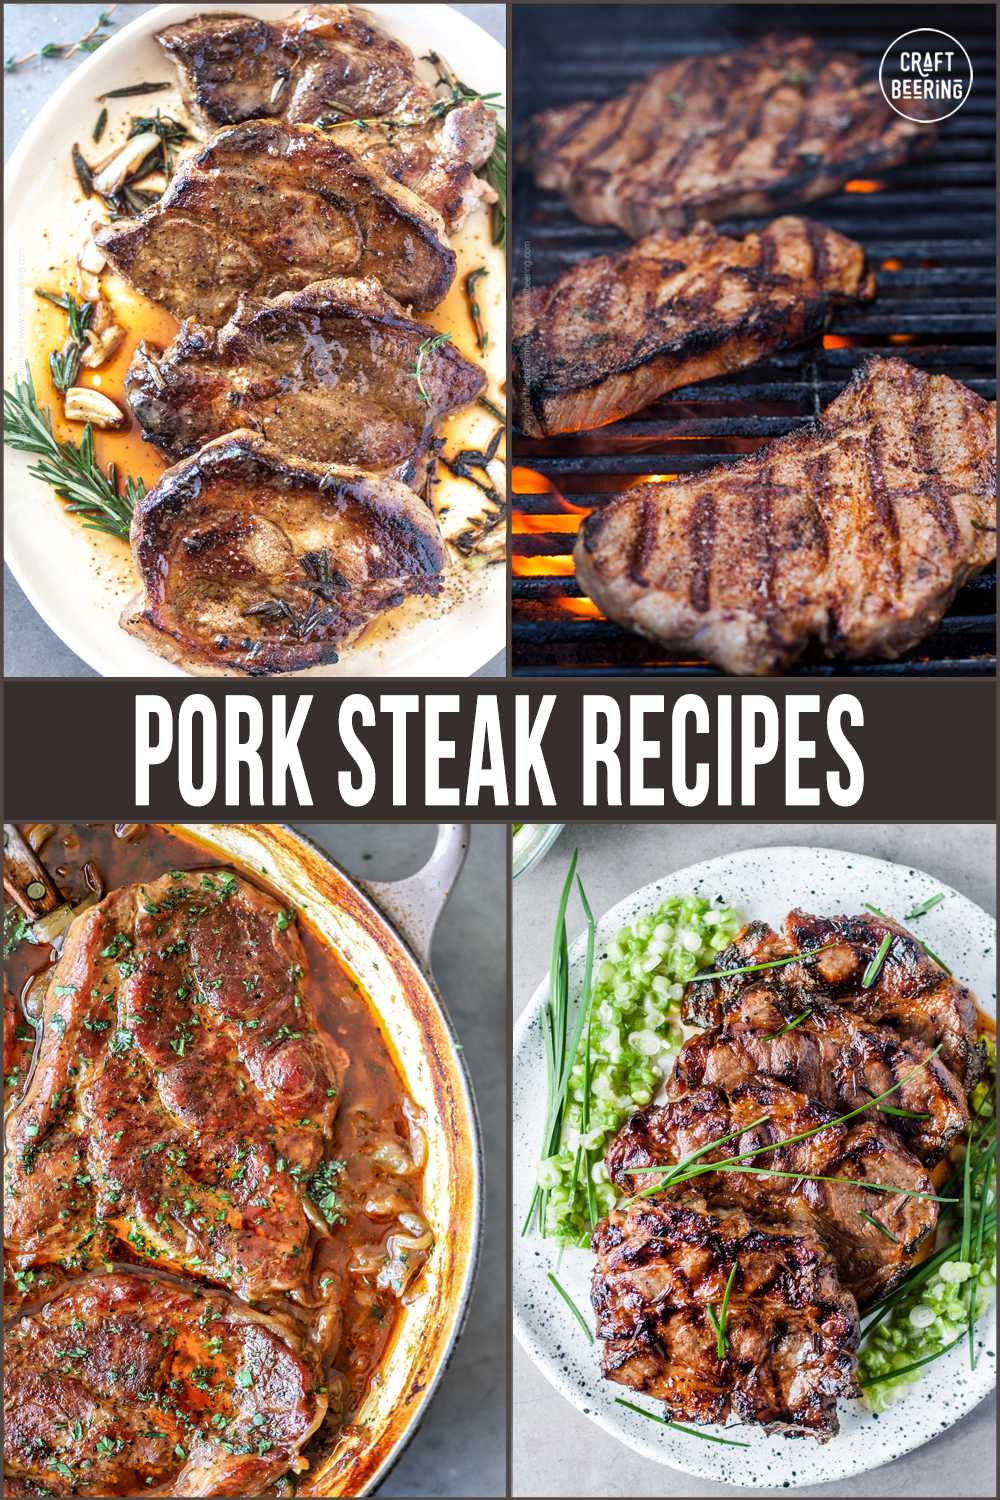 How to Cook Pork Steak Recipes & Tips | Craft Beering